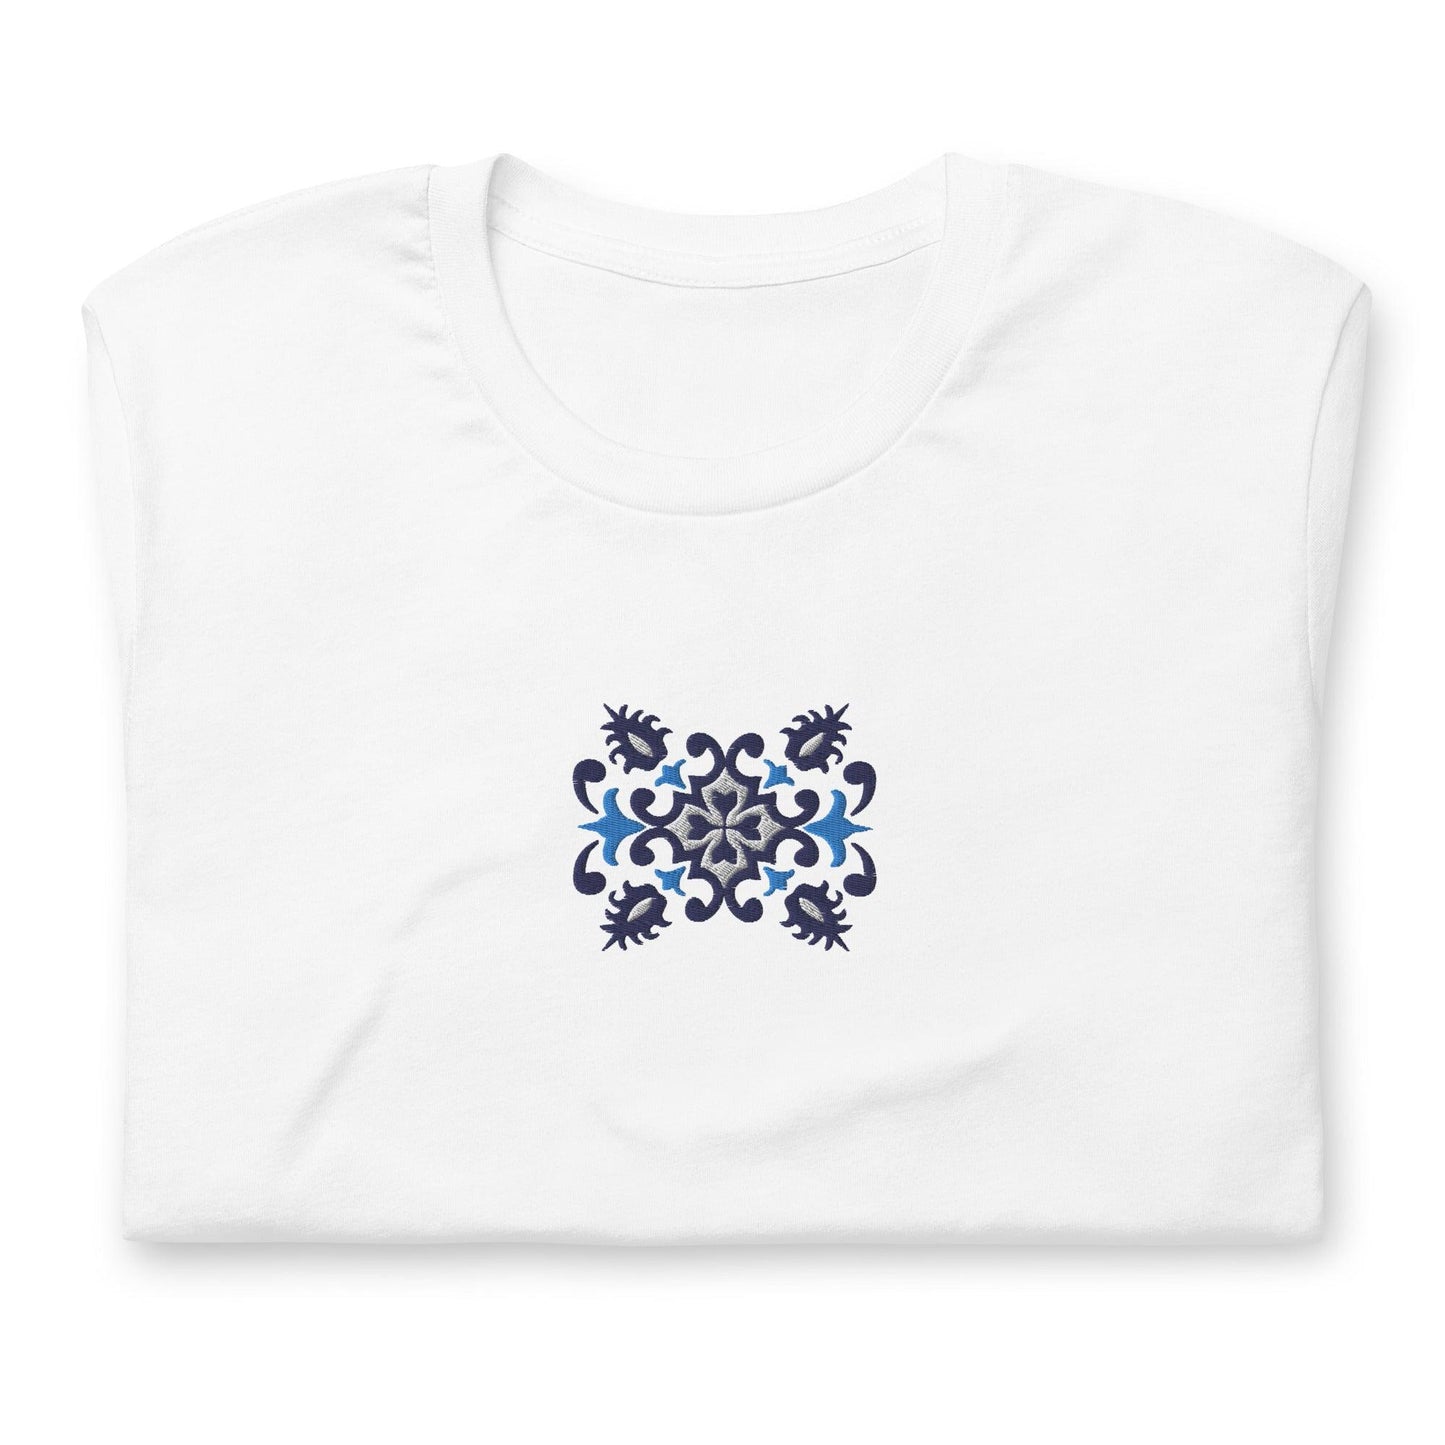 Portuguese Azulejo Tile Embroidered T-shirt - The Global Wanderer